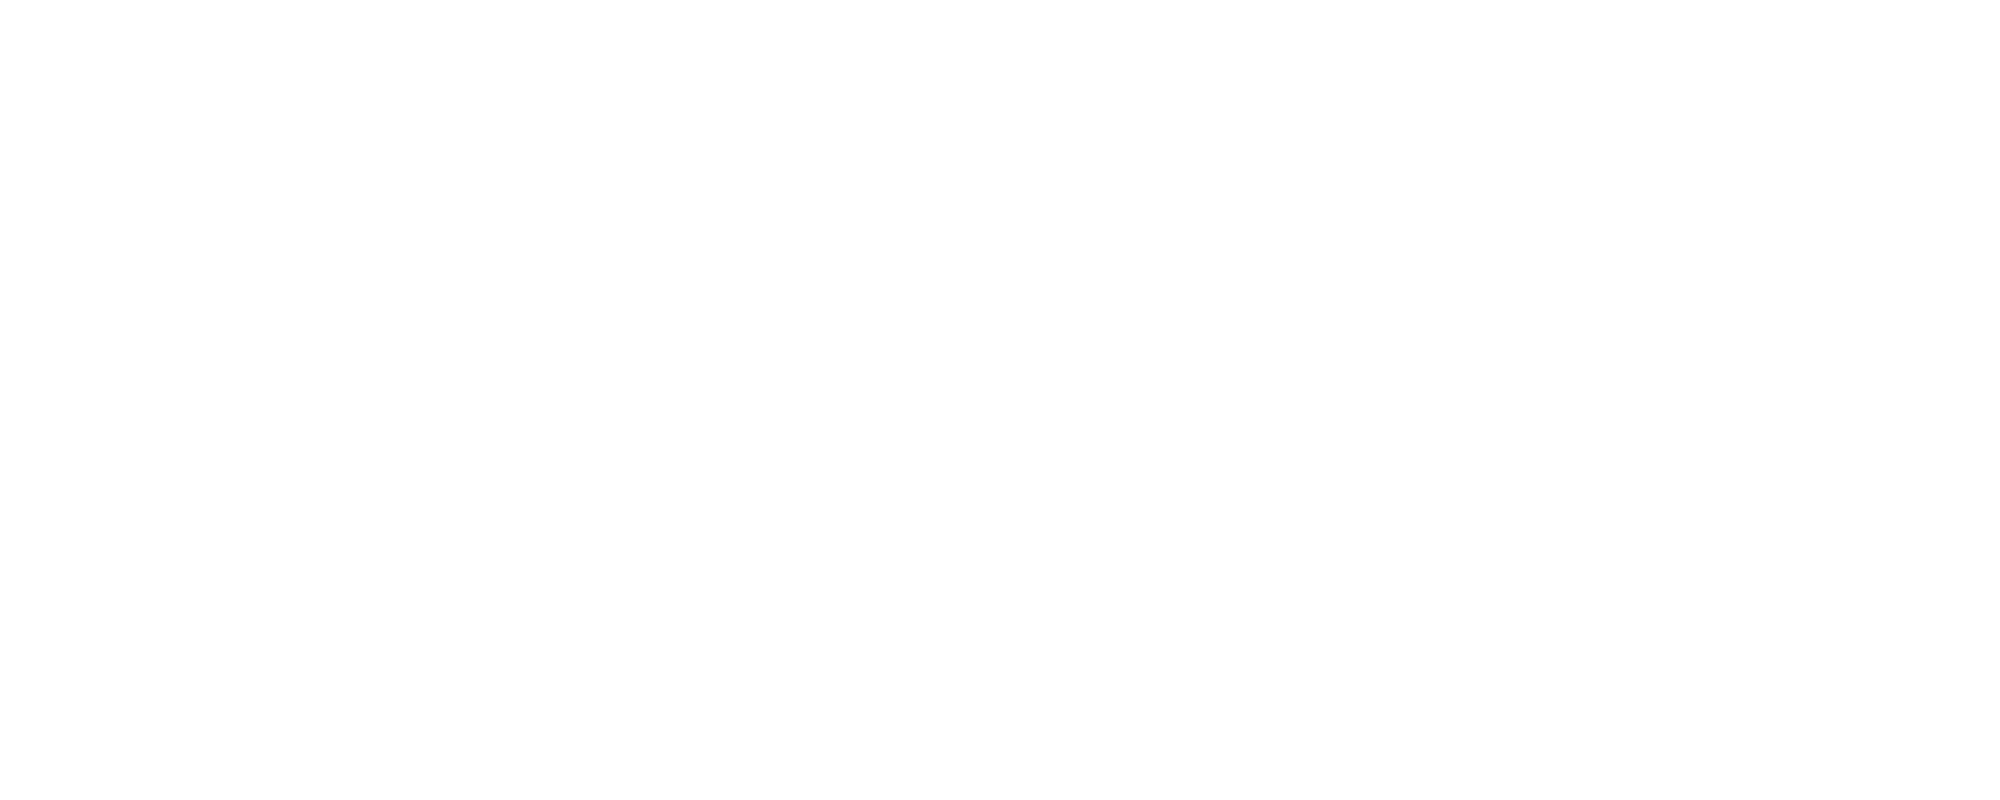 OVATION TV PICKS UP 134+ HOURS FROM DCD RIGHTS